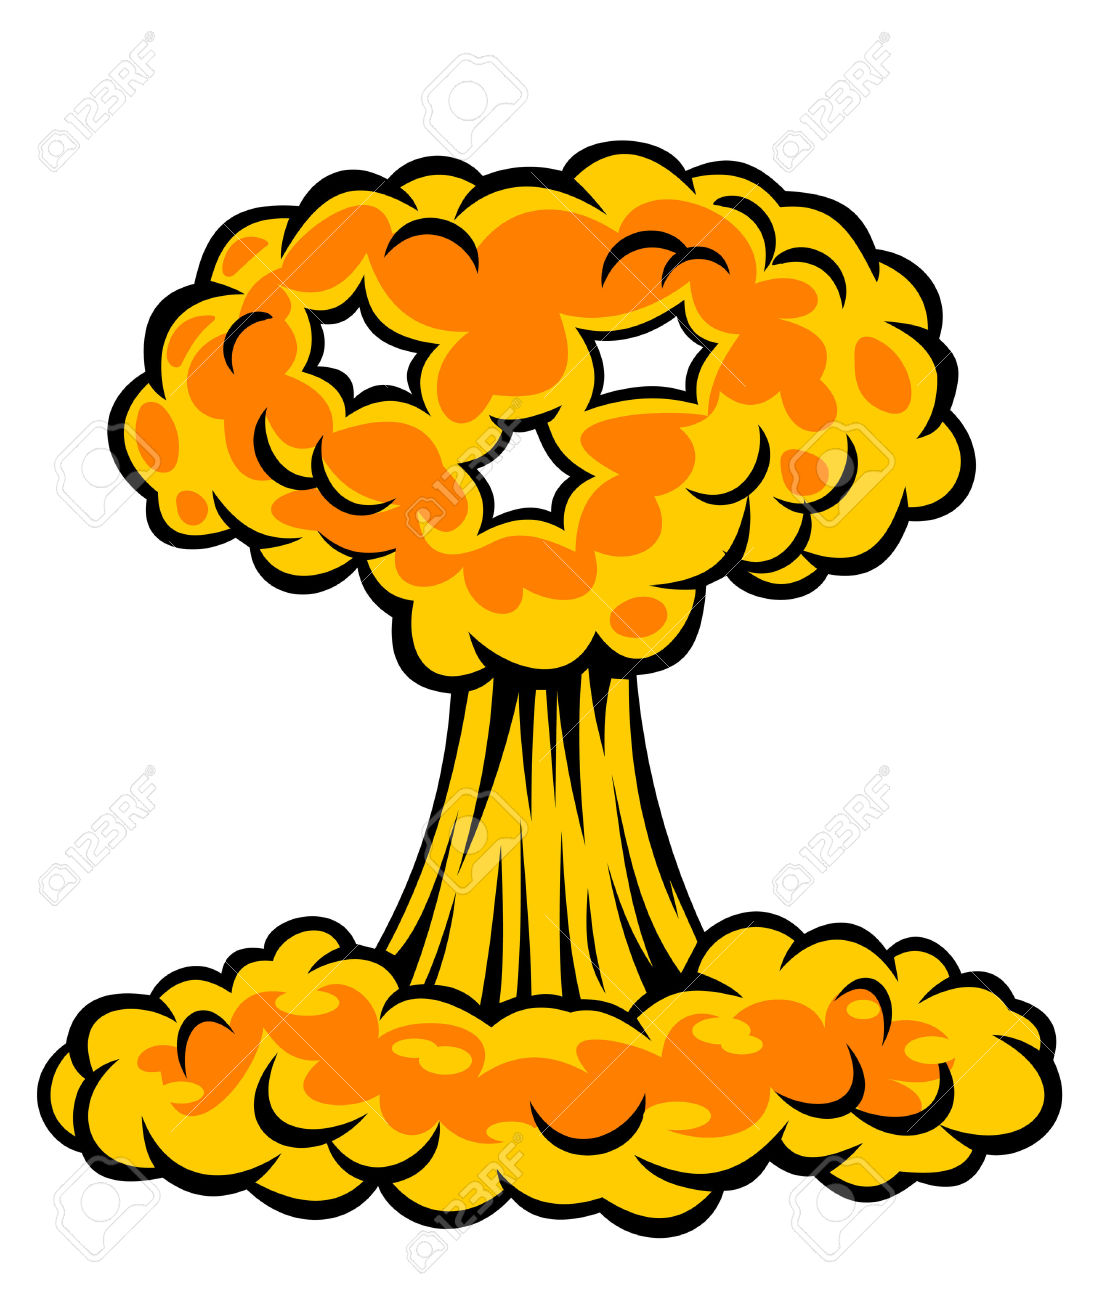 Nuclear Explosion With Skull Cloud. Vector Illustration Royalty.